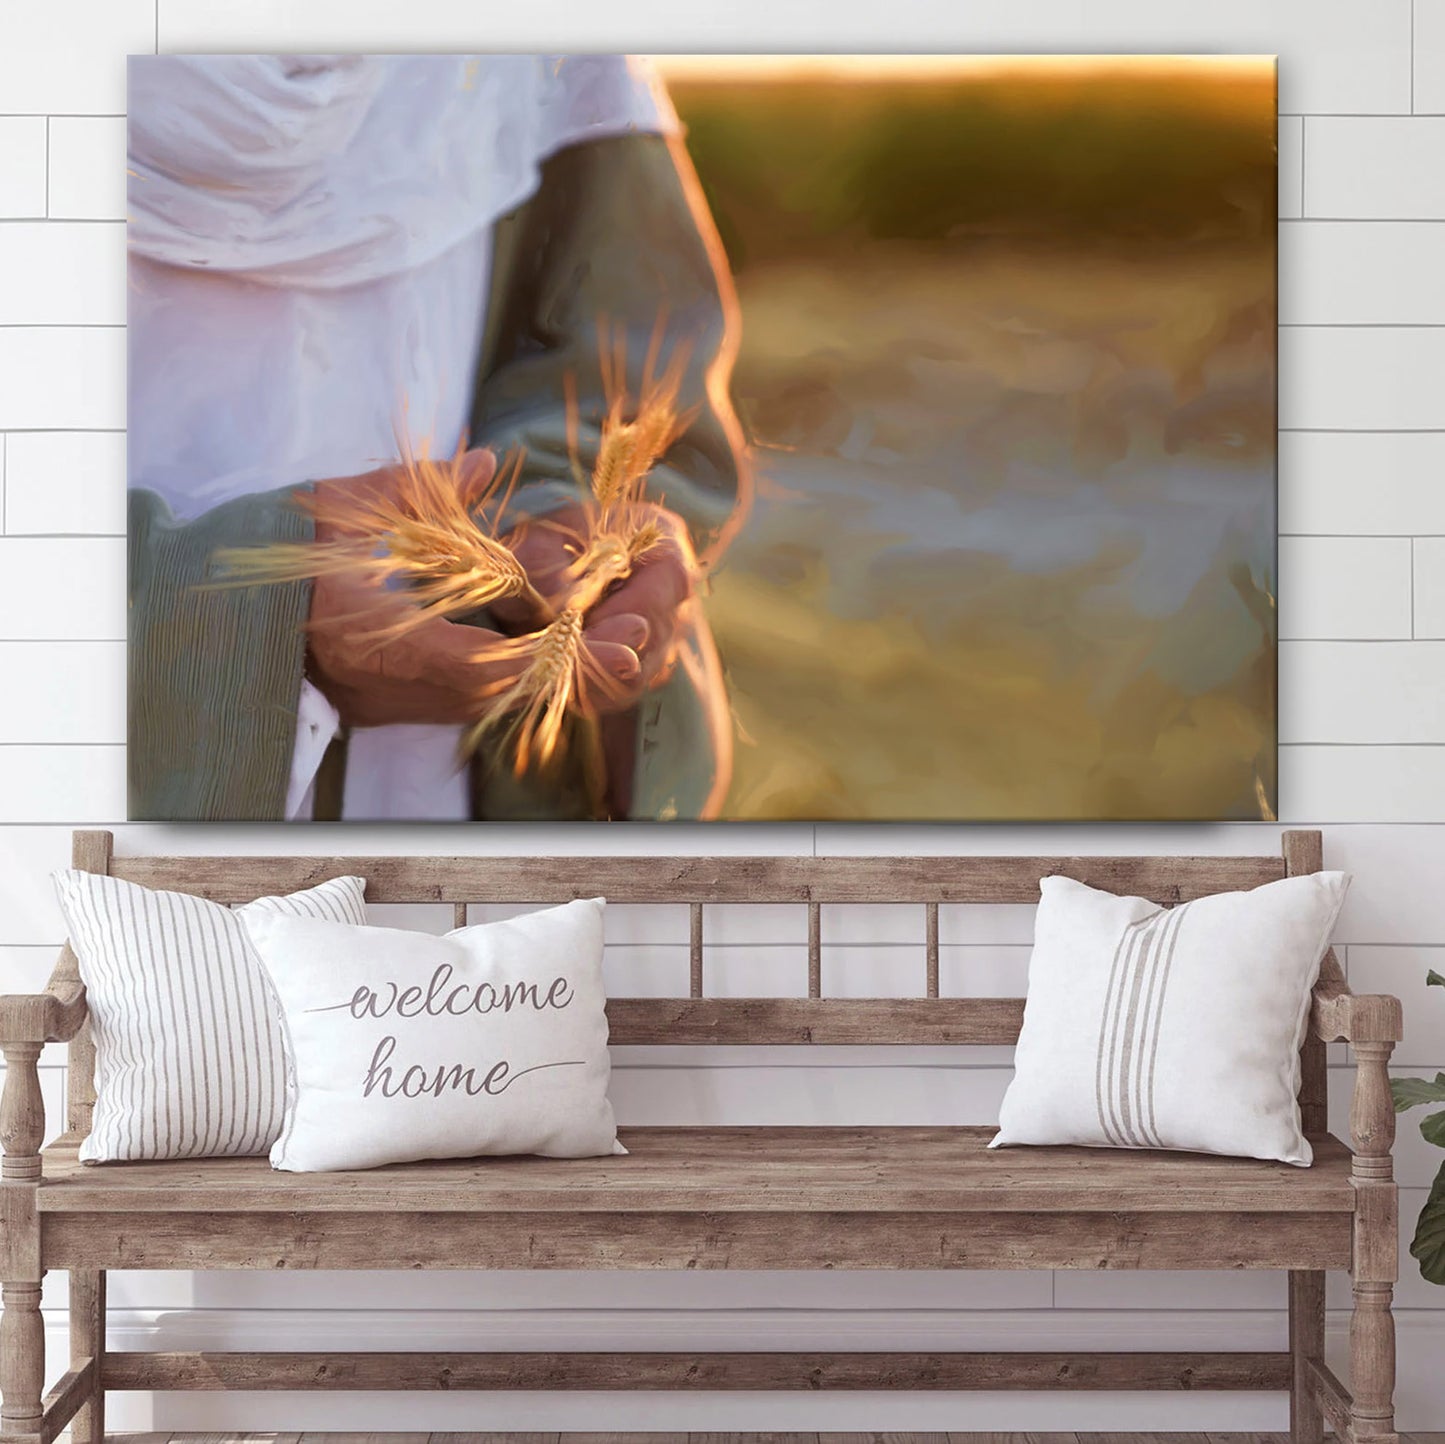 Wheat And Tares  Canvas Picture - Jesus Christ Canvas Art - Christian Wall Art